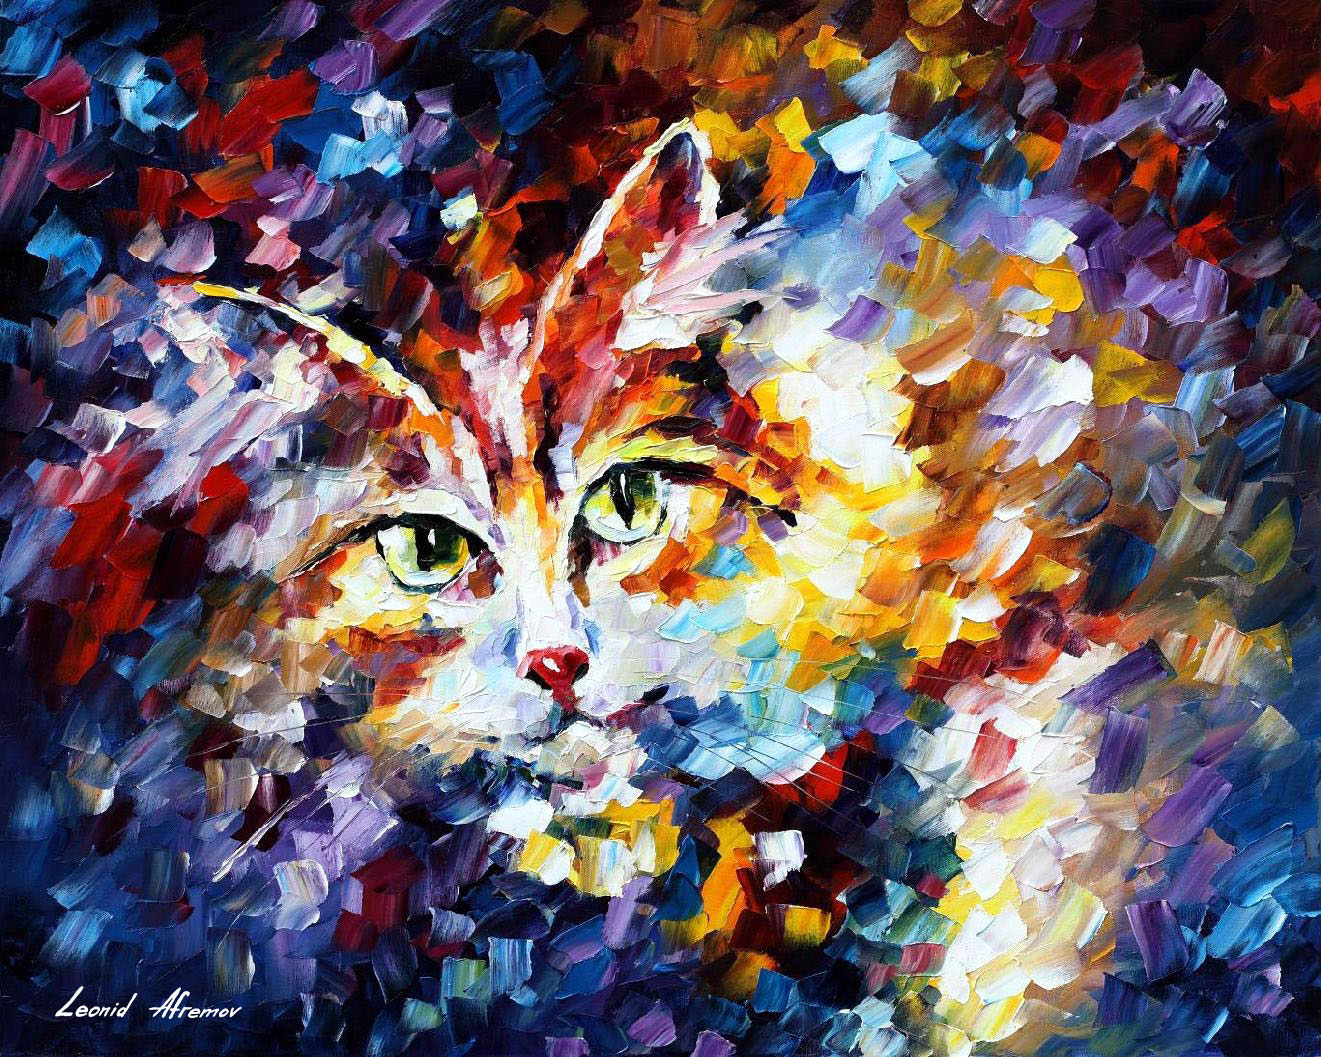 NIGHT OF INSPIRATION - Palette Knife Oil Painting On Canvas By Leonid  Afremov - 30X24 (75cm x 60cm)